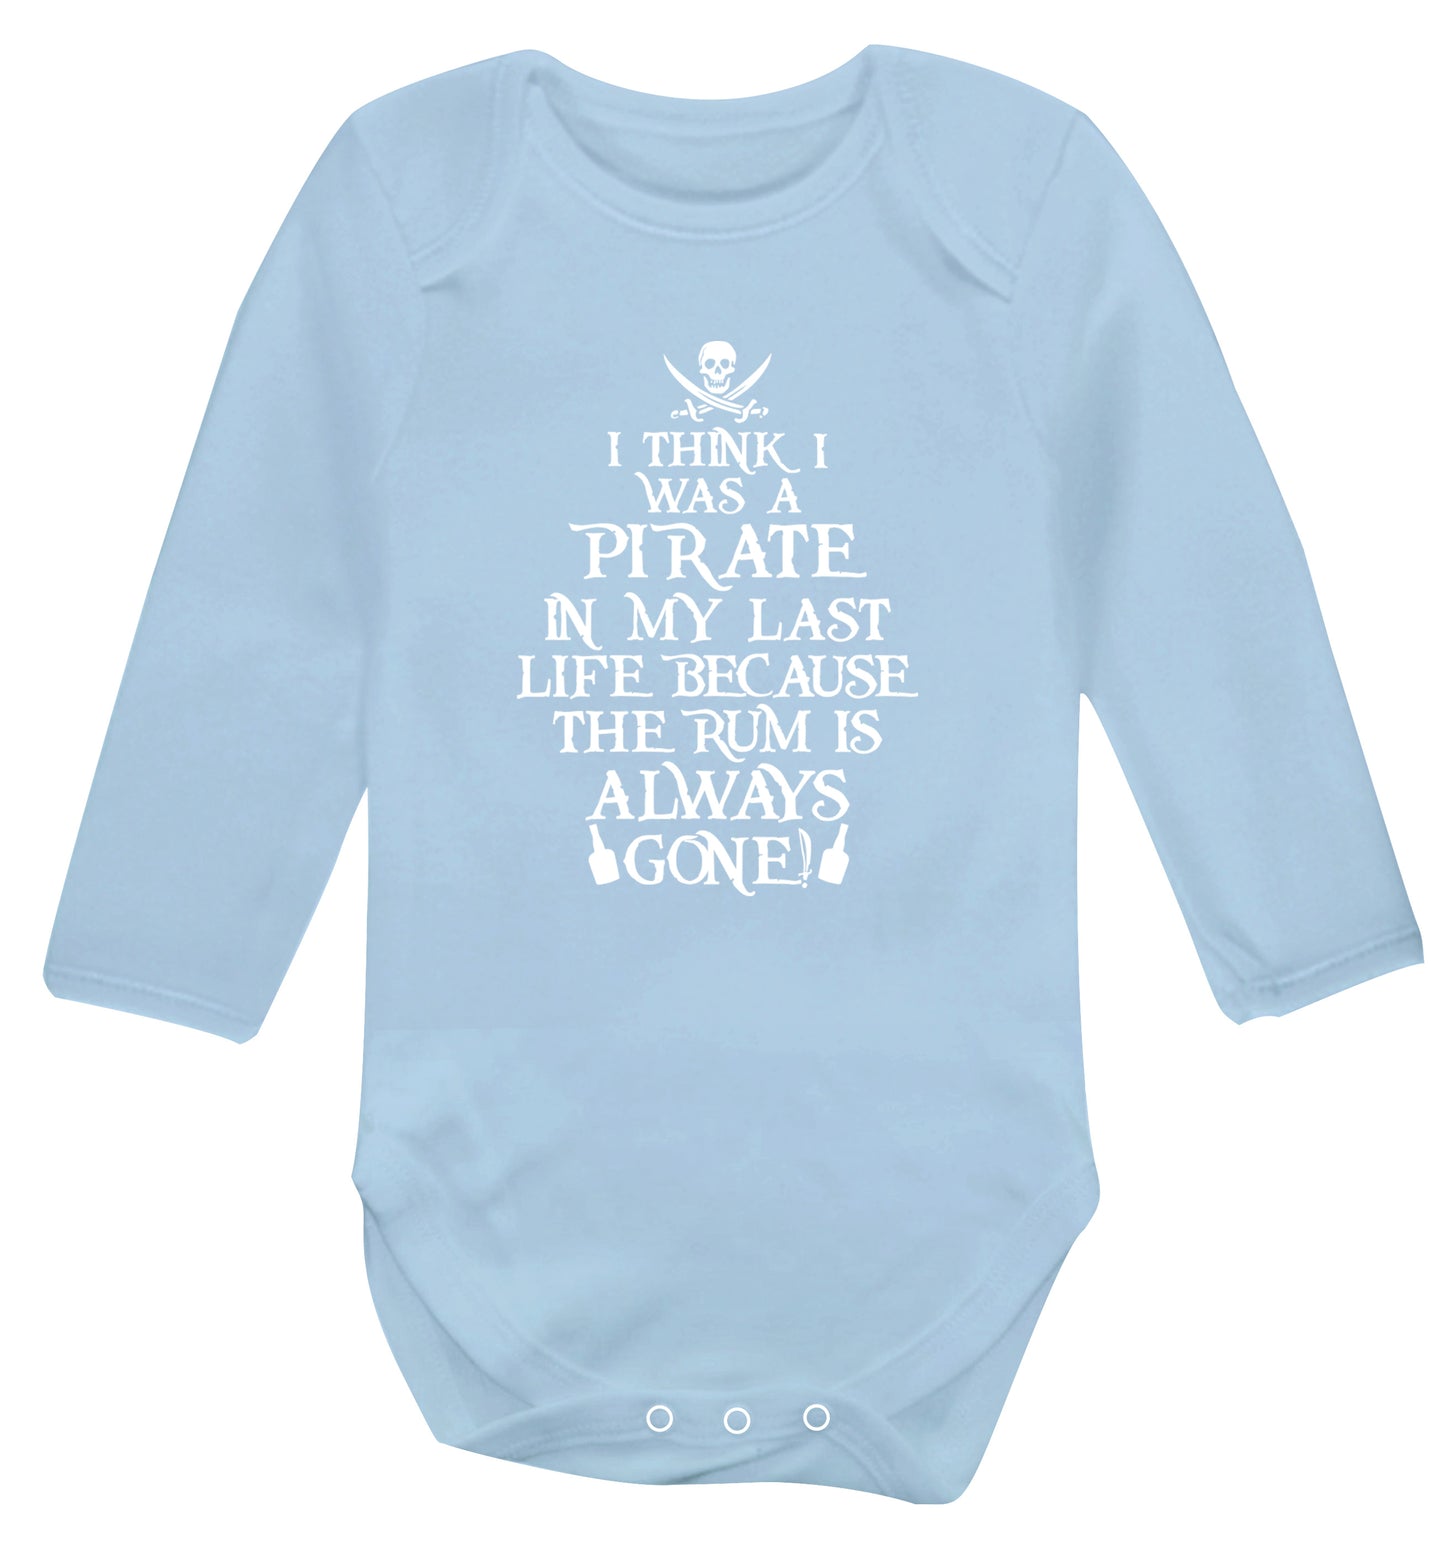 I think I was a pirate in my past life because the rum is always gone! Baby Vest long sleeved pale blue 6-12 months